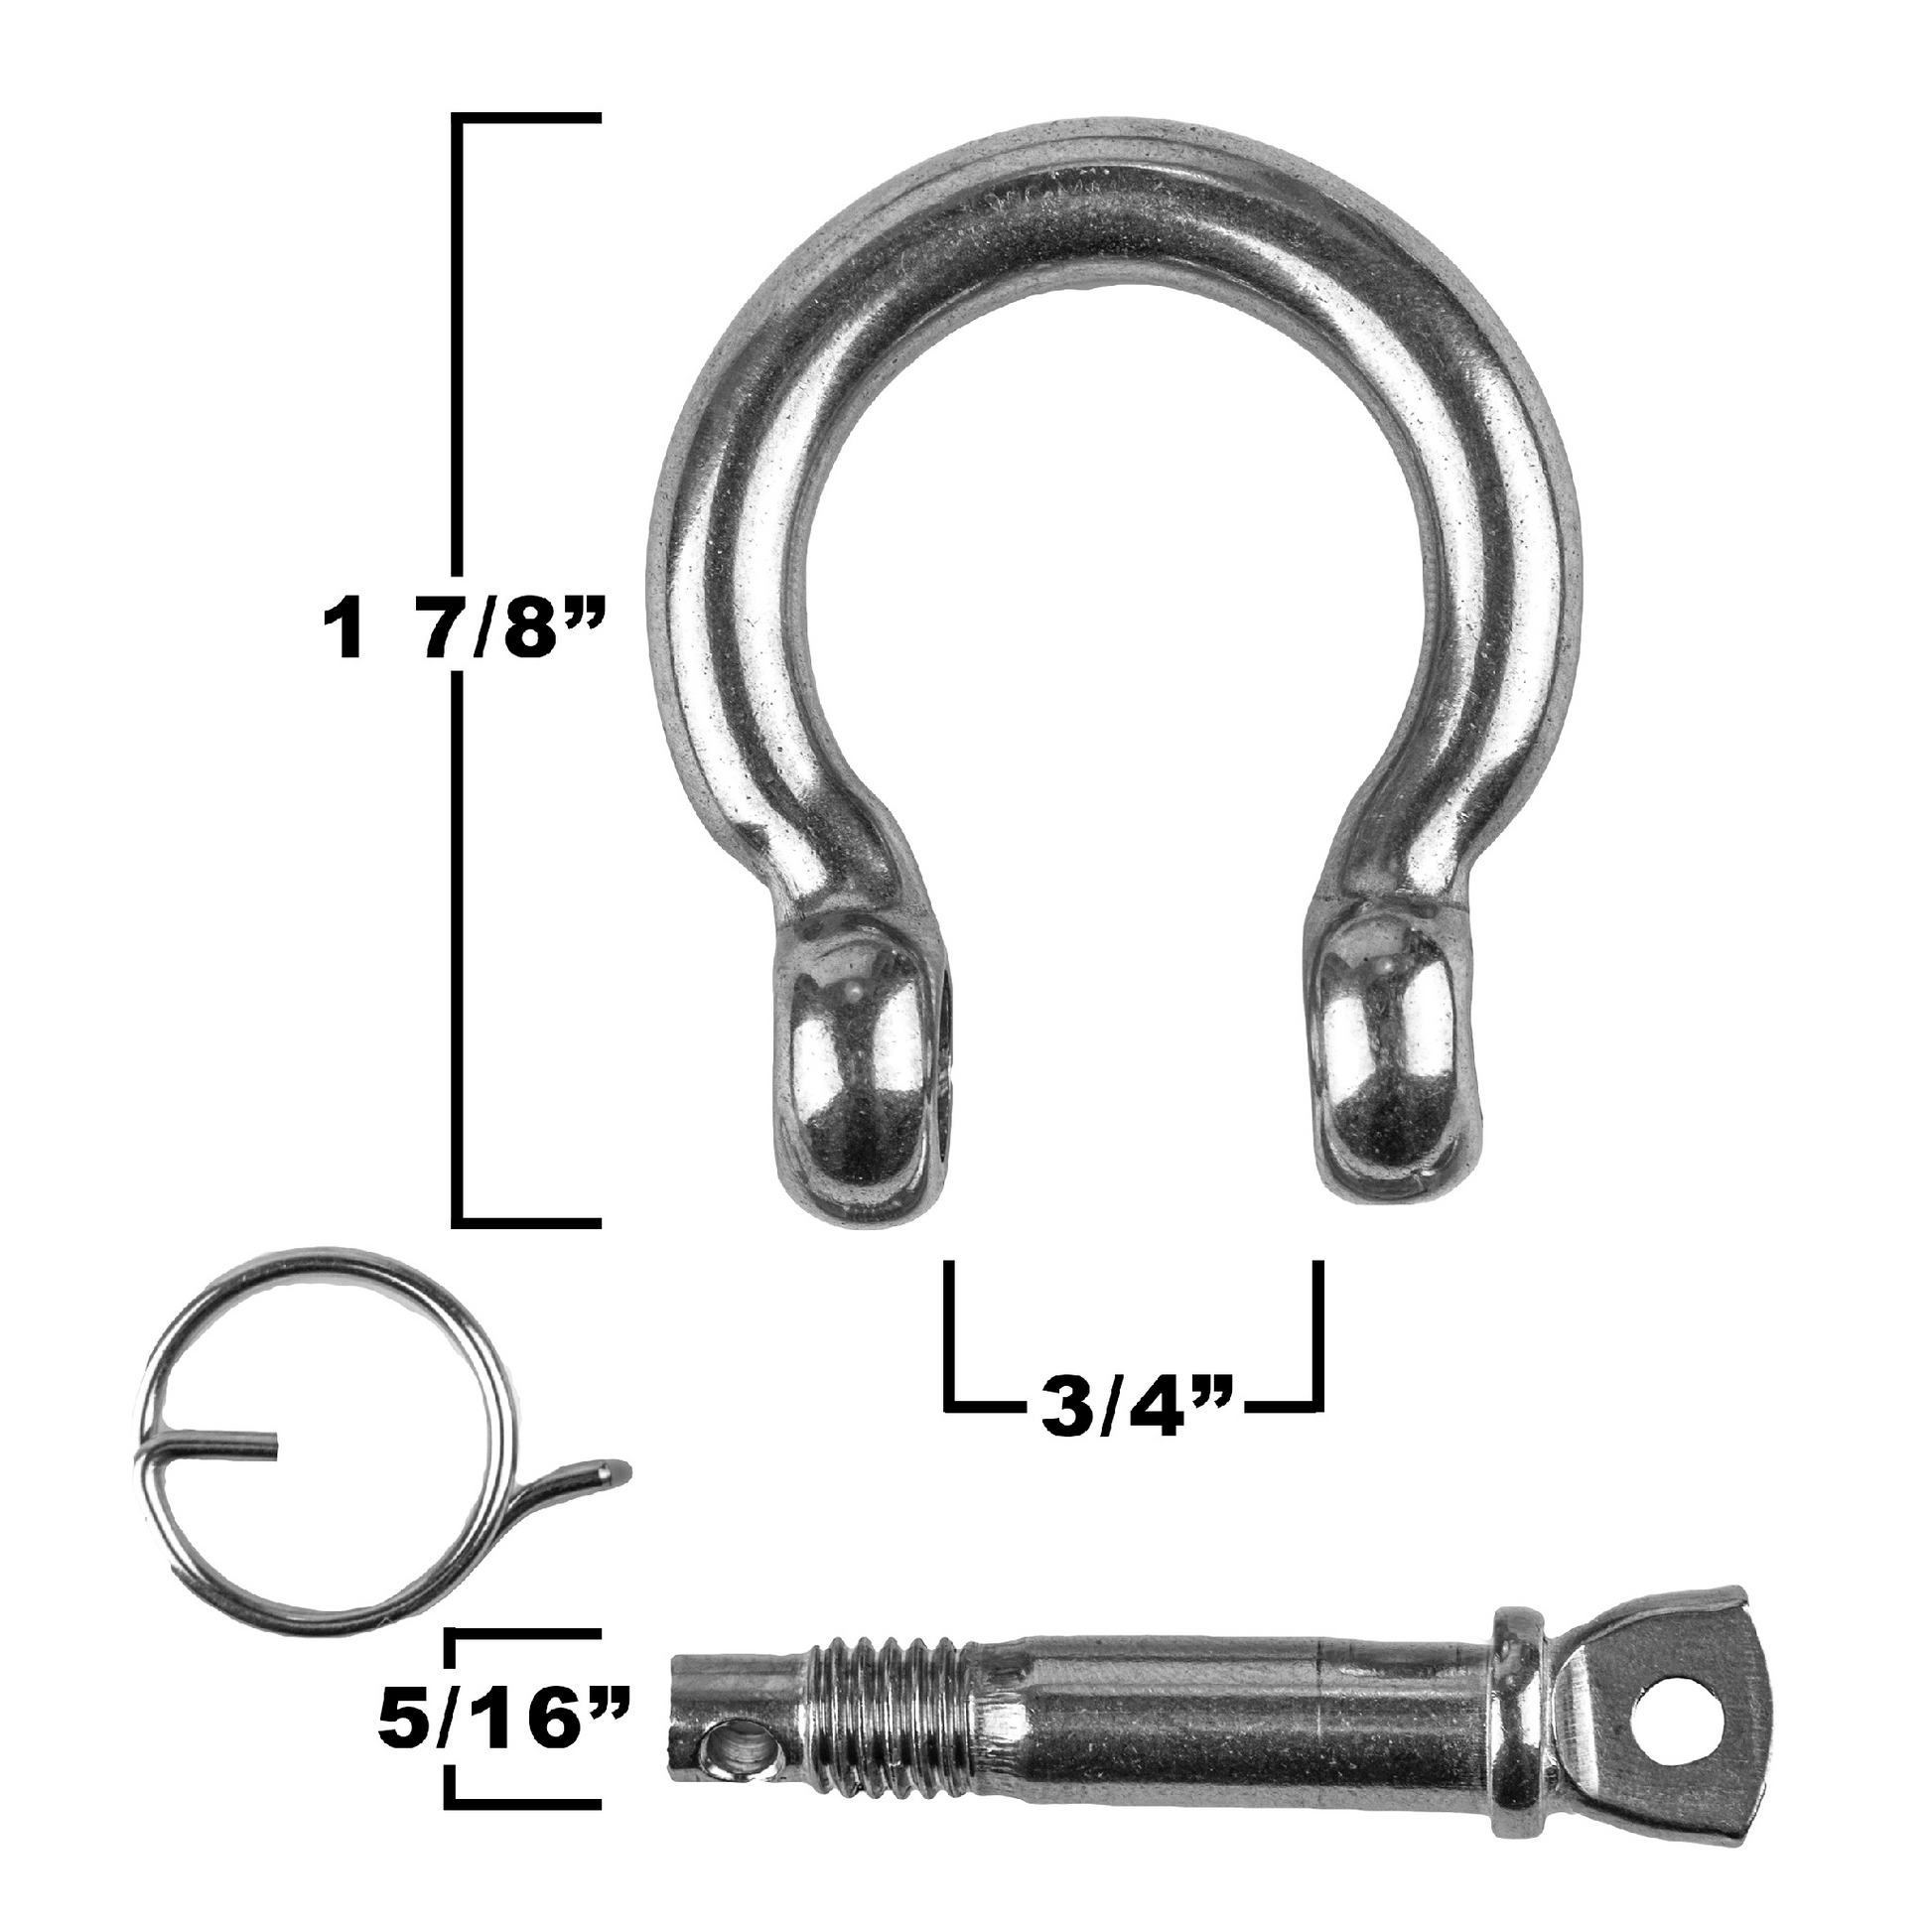 HarborCraft Stainless Steel 316 Anchor Chain with Advanced Lock